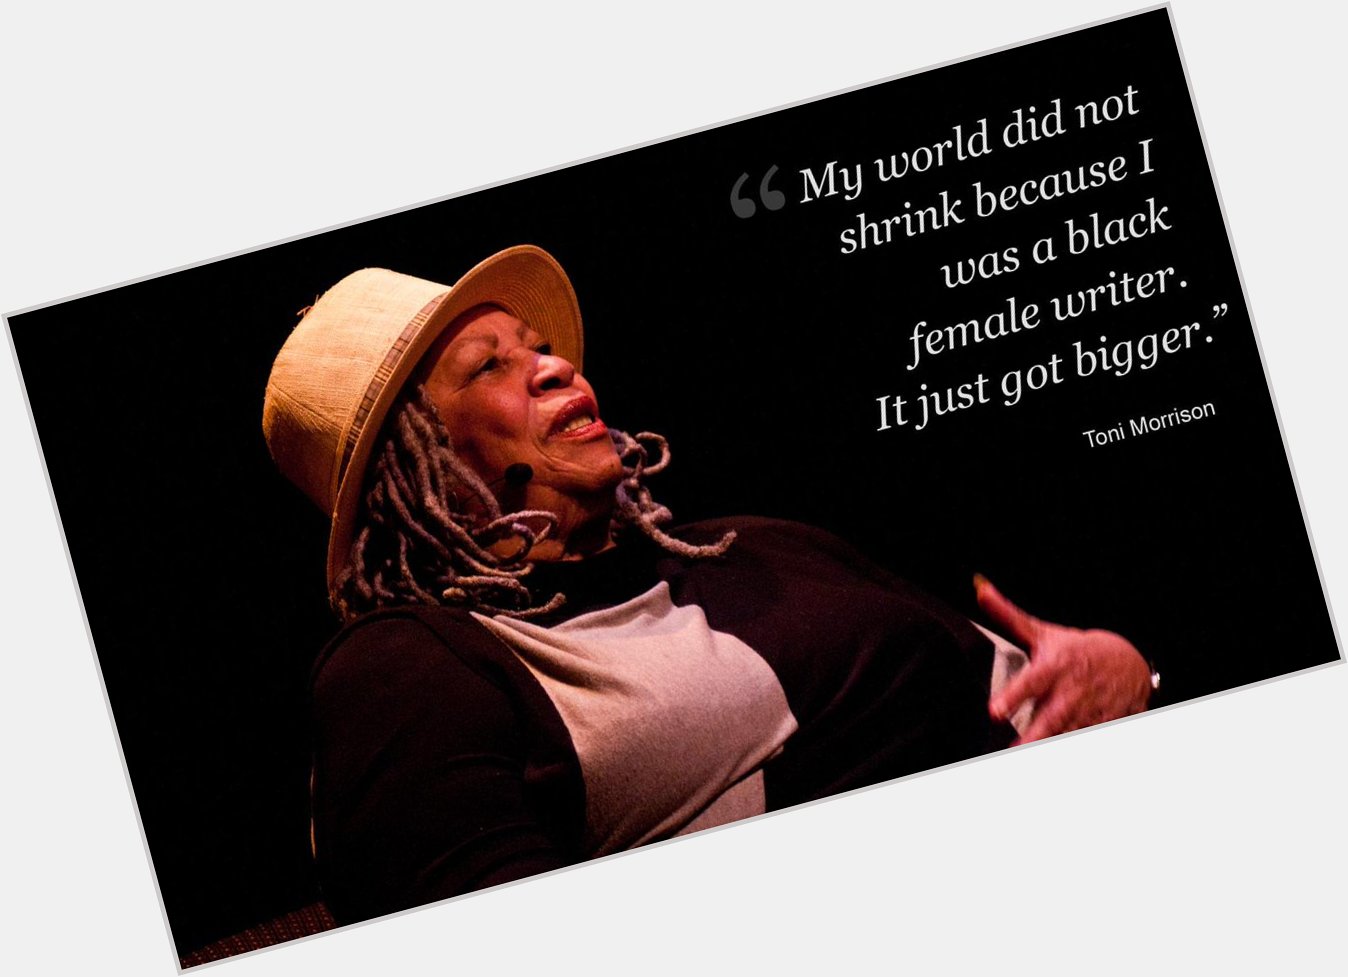  My world did not shrink because I was a black female writer -- Happy birthday Toni Morrison:  